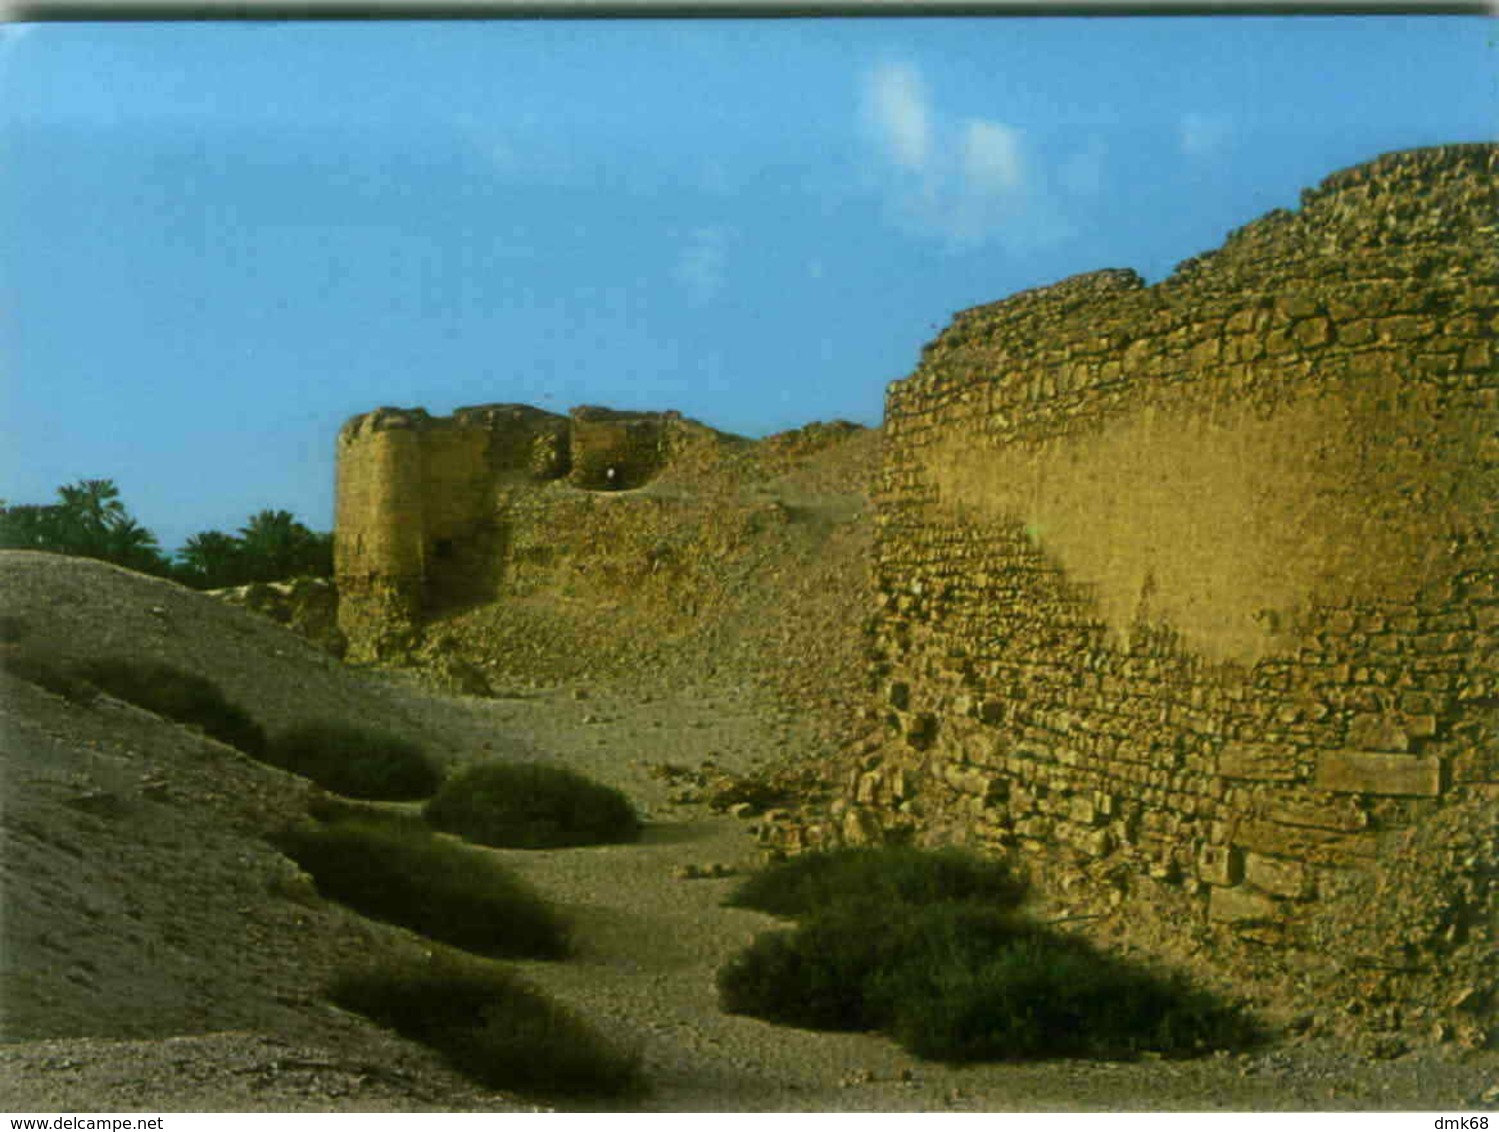 BAHRAIN FORT - BY NATIONAL BOOKSHOP AND BRANCHES - 1960s/70s (BG2582) - Baharain